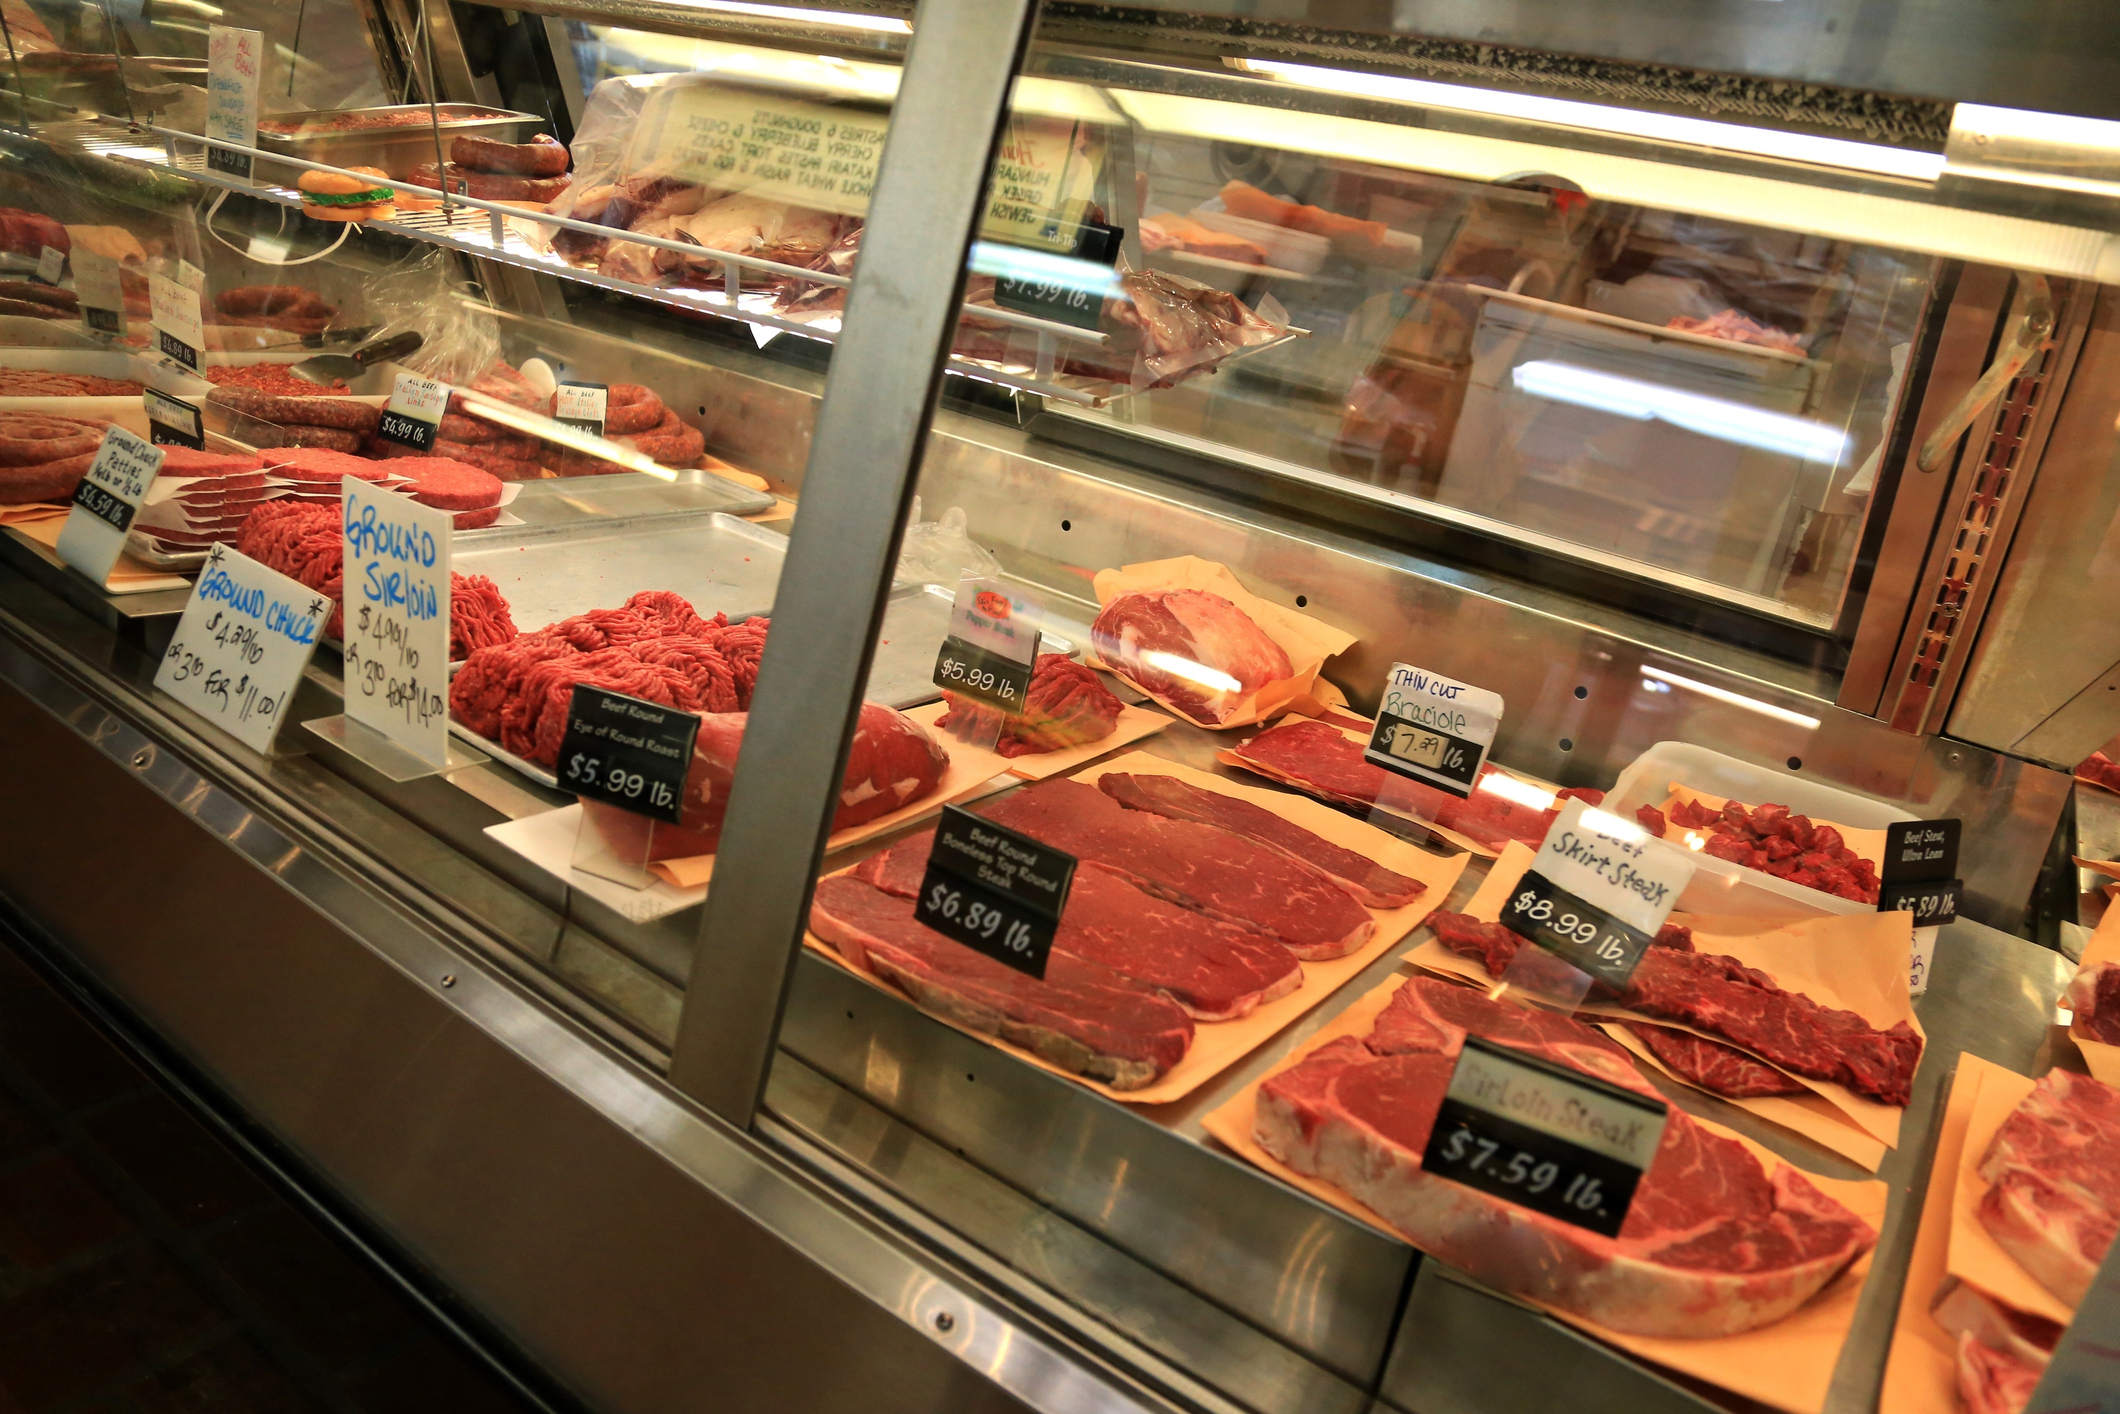 Meat counter displaying various cuts with price tags in a refrigerator case at a store